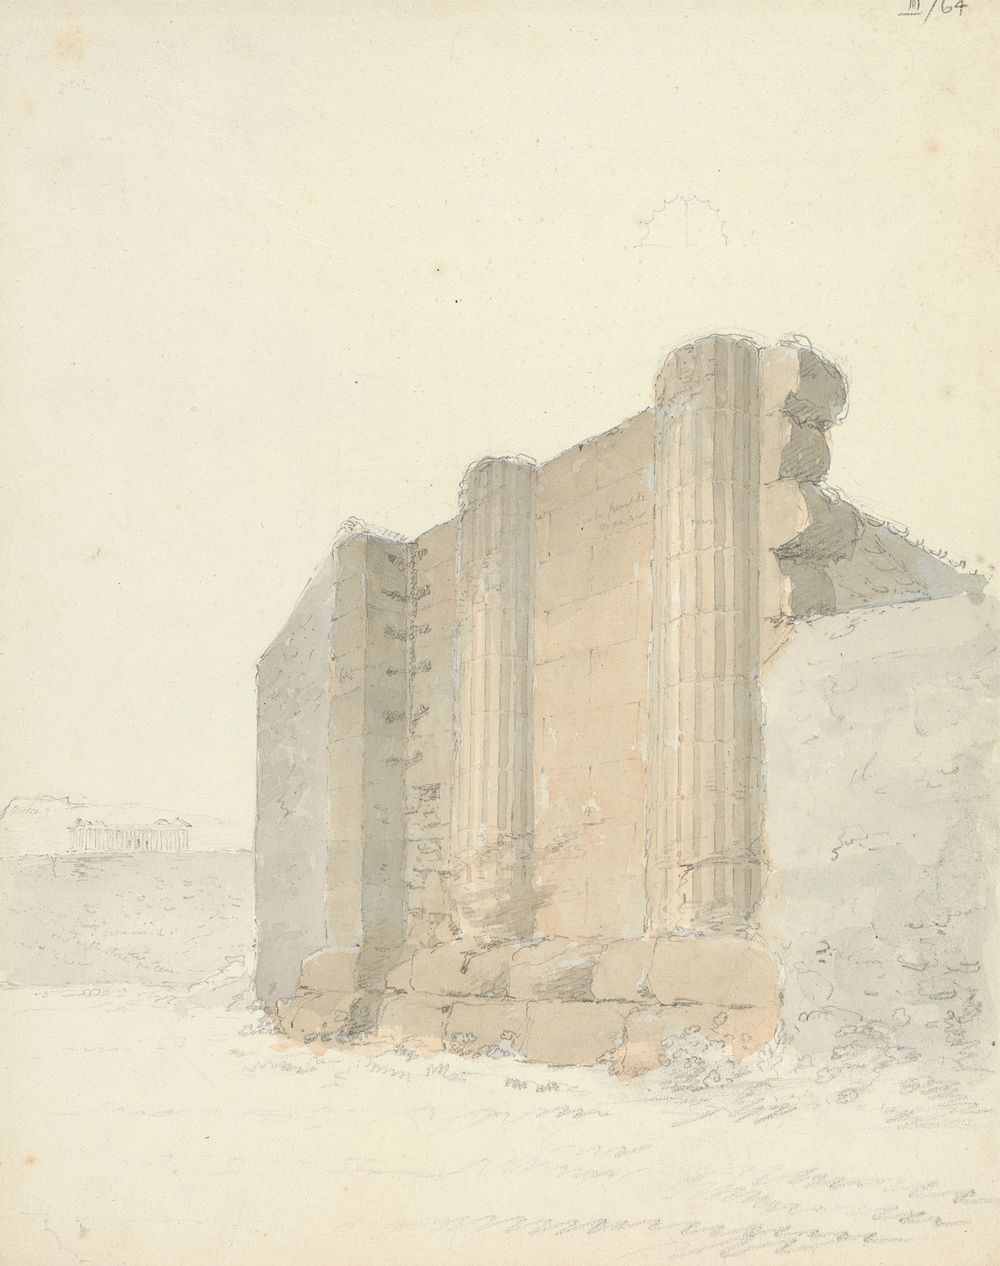 Sketch of the Temple of Asclepius at Agrigento, Sicily by Sir Robert Smirke the younger